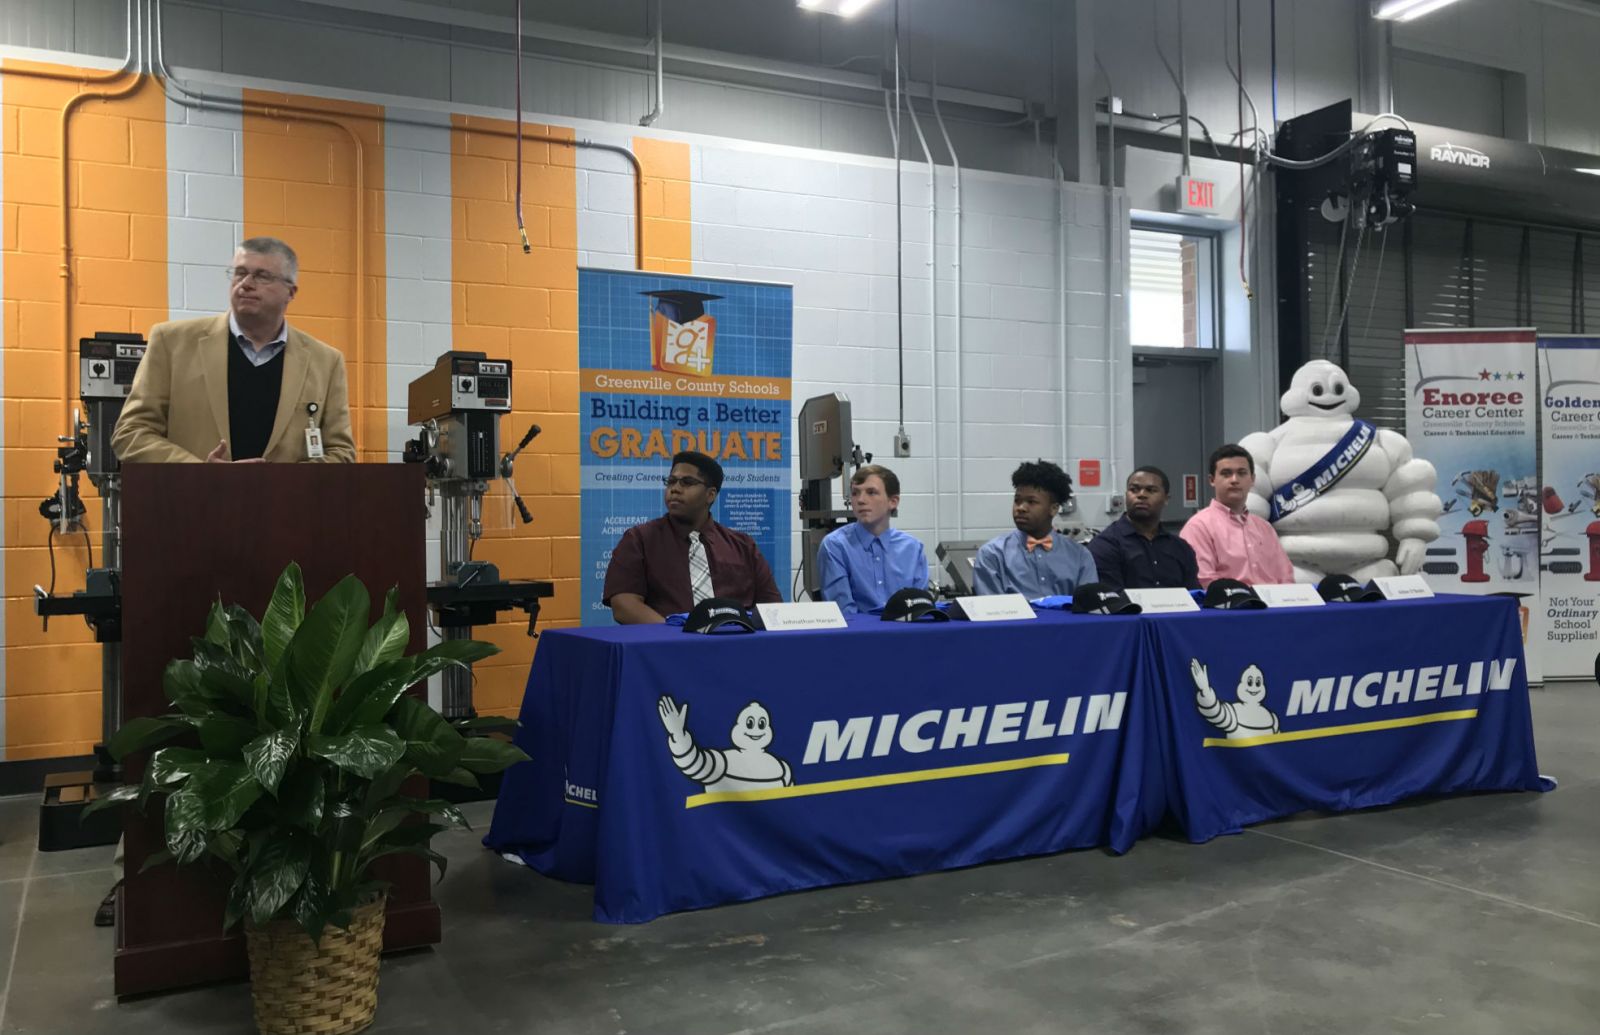 Michelin North America and Greenville County schools partnered for the Michelin Youth Apprenticeship program and held a signing day for the first five apprentices. From left, Burke Royster, superintendent of Greenville County schools, and apprentices Johnathan Harper, Jacob Tucker, Iquavious Lewis, Janias Tinch and Aidan O'Boyle. (Photo/Teresa Cutlip)